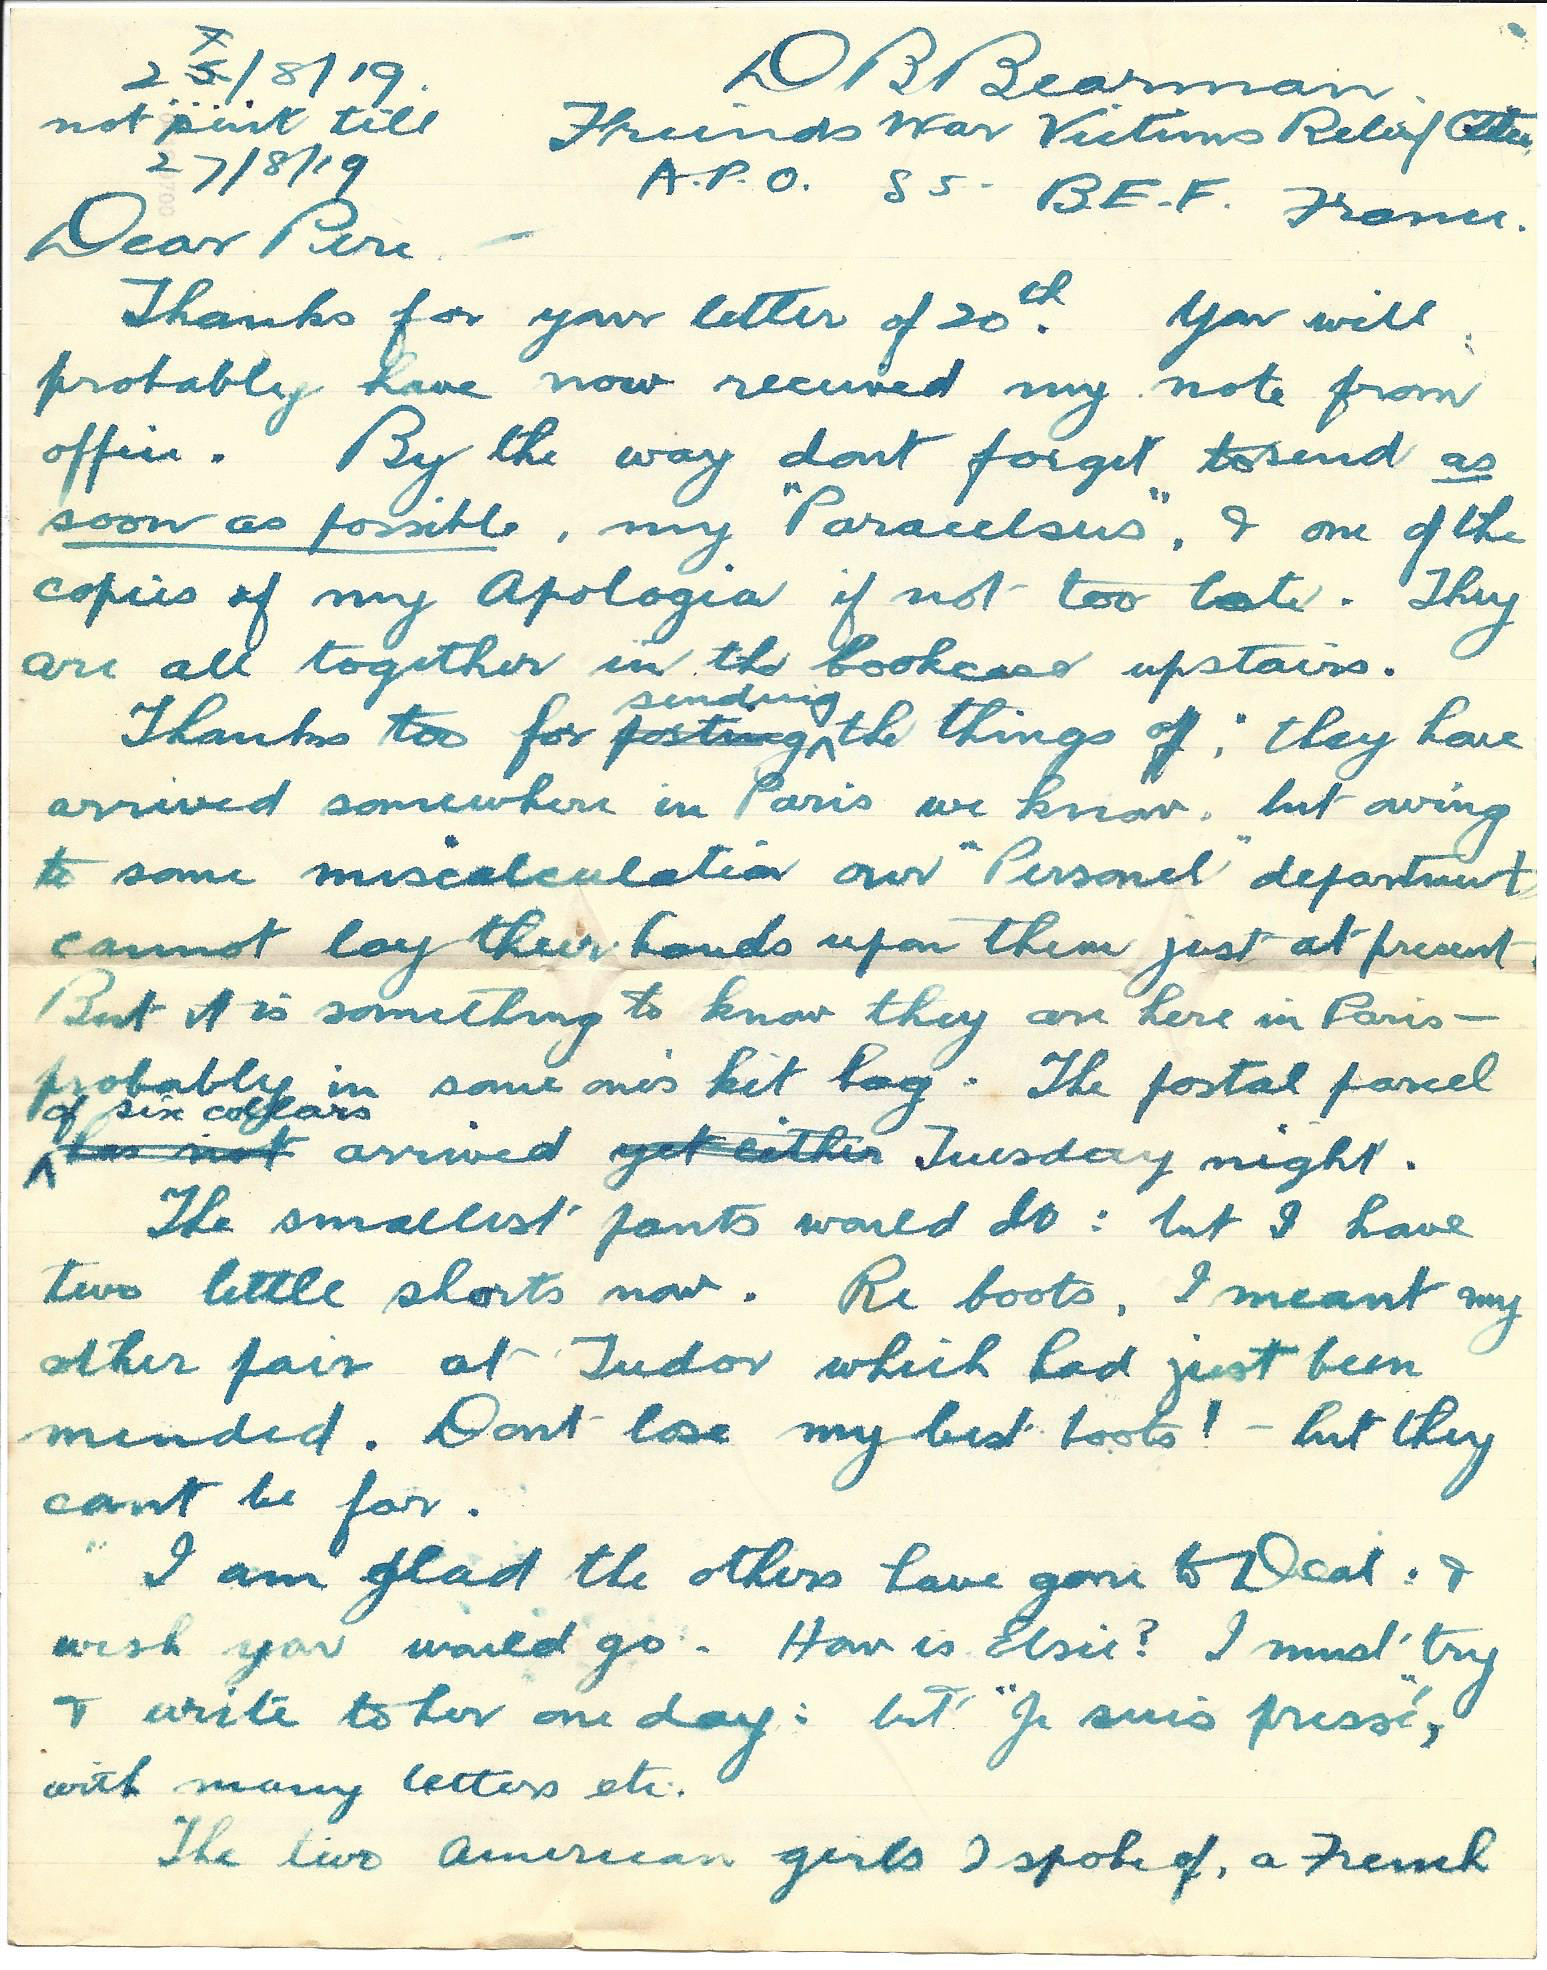 1919-08-27 page 1 letter by Donald Bearman